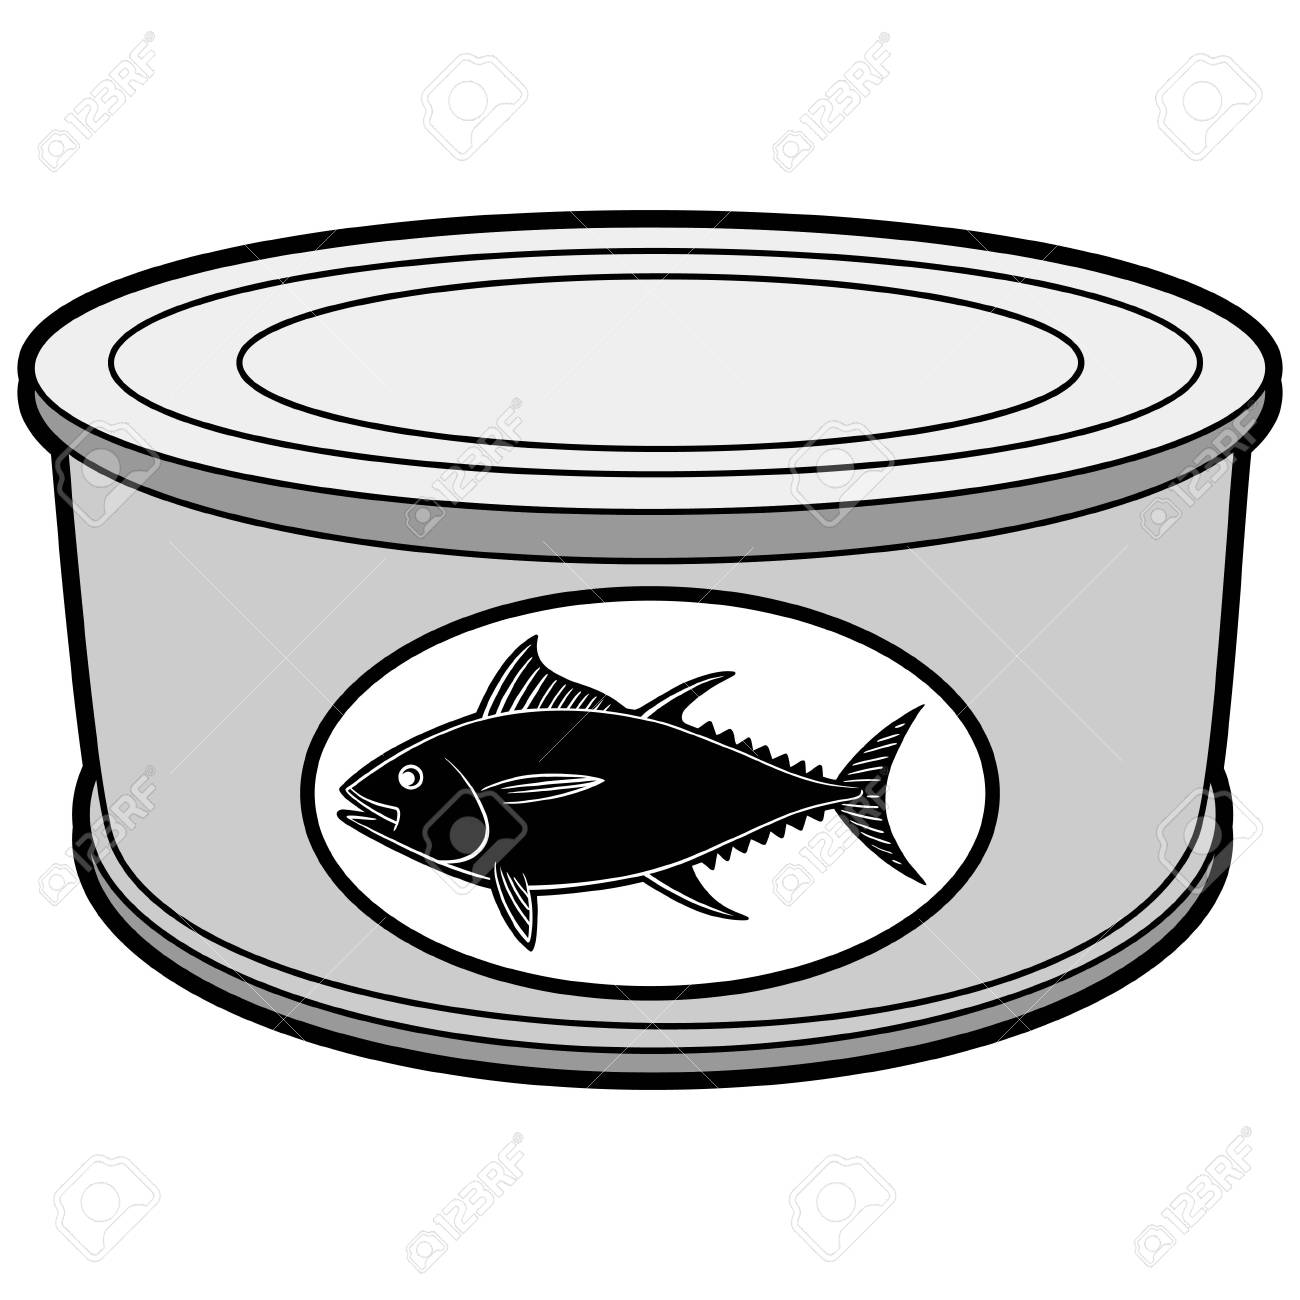 Tuna Can Clipart & Free Clip Art Images #29756.